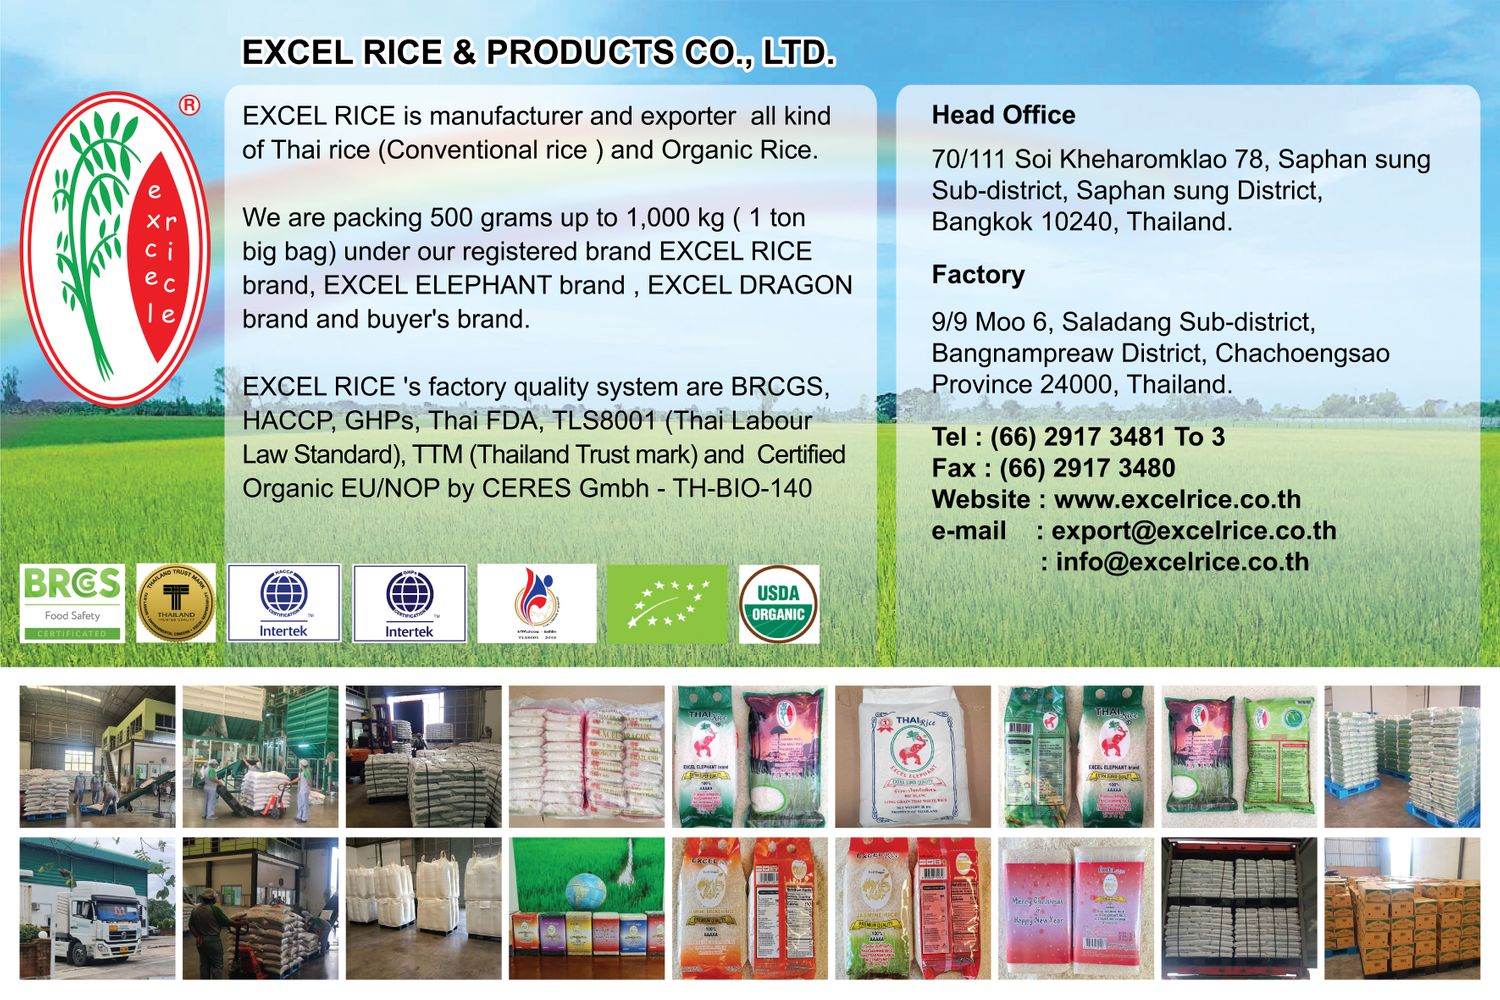 Excel Rice & Products Co., Ltd.